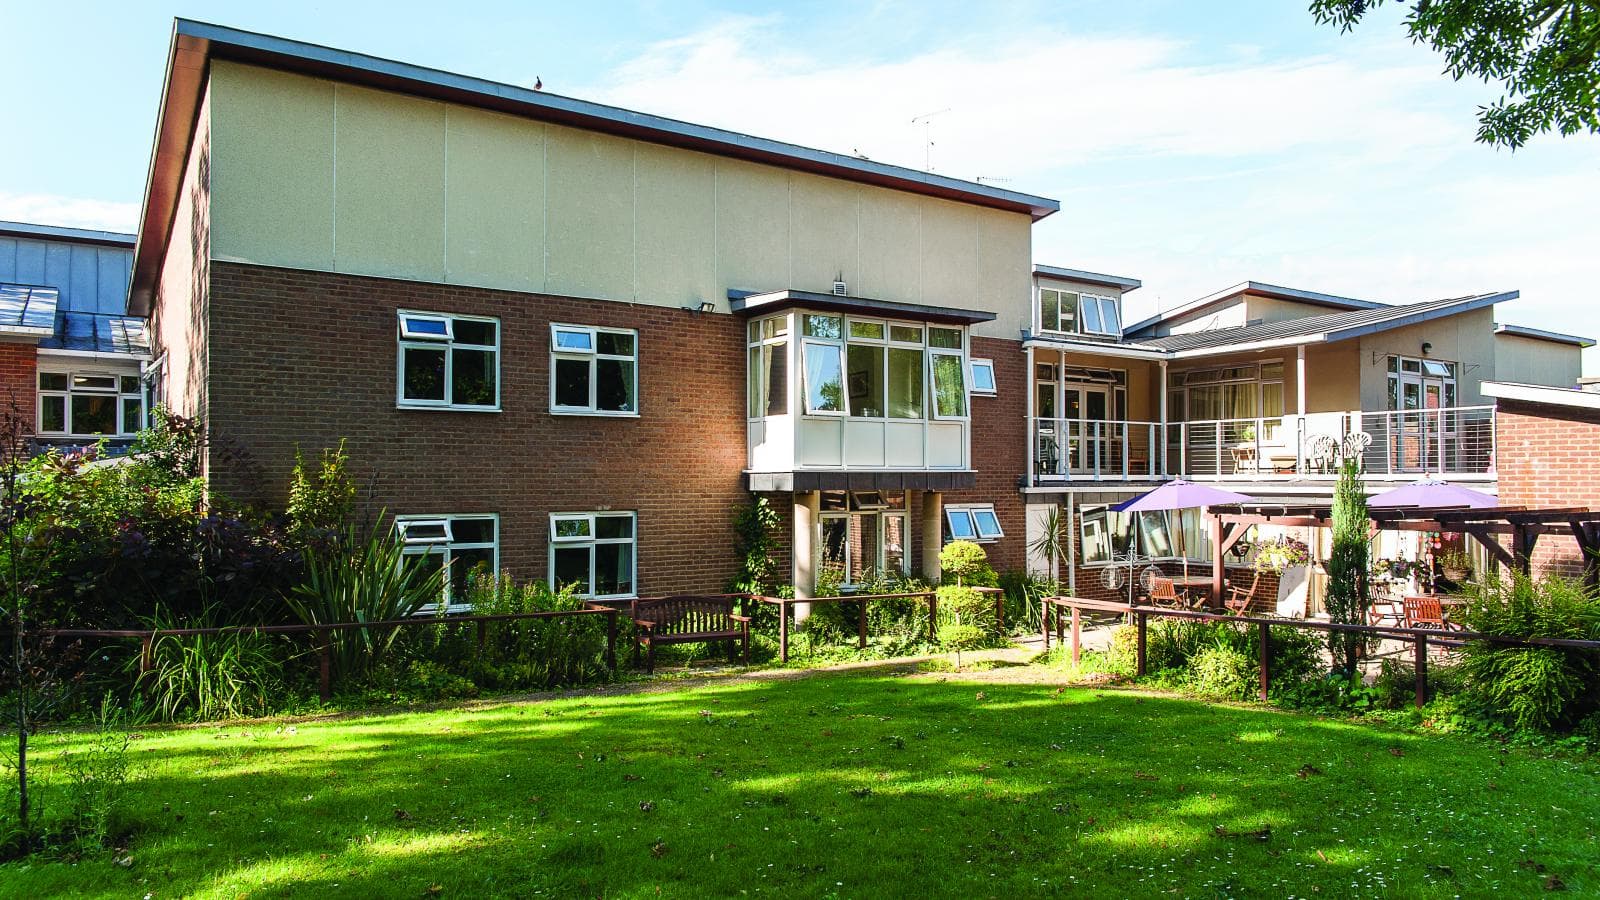 The Meadow care home